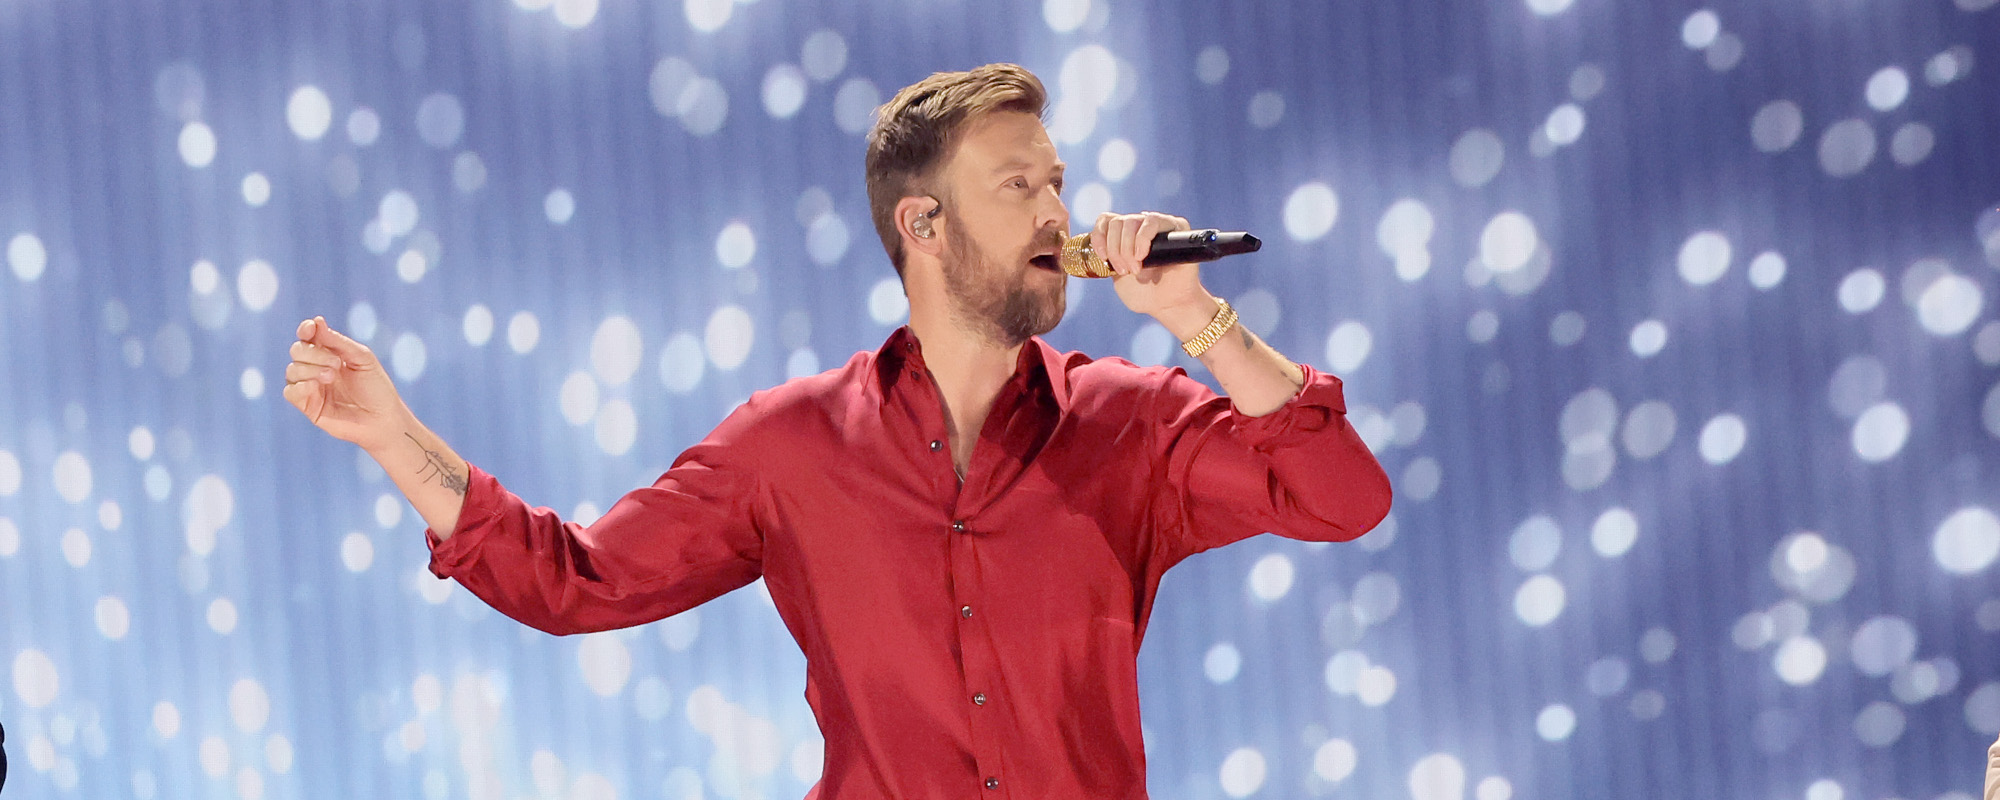 Charles Kelley is Getting Sober with “Tools in Place”